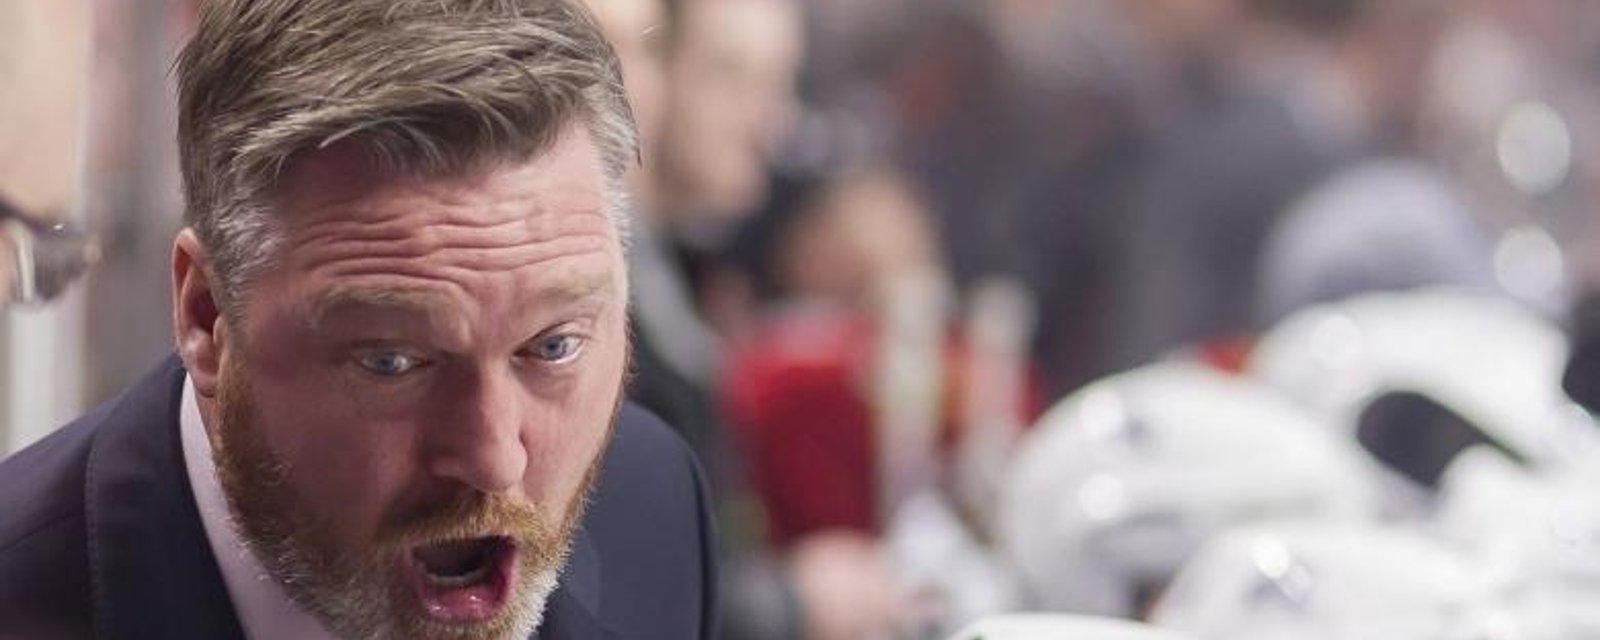 Patrick Roy rips one of his top stars, gets called out in a major way.